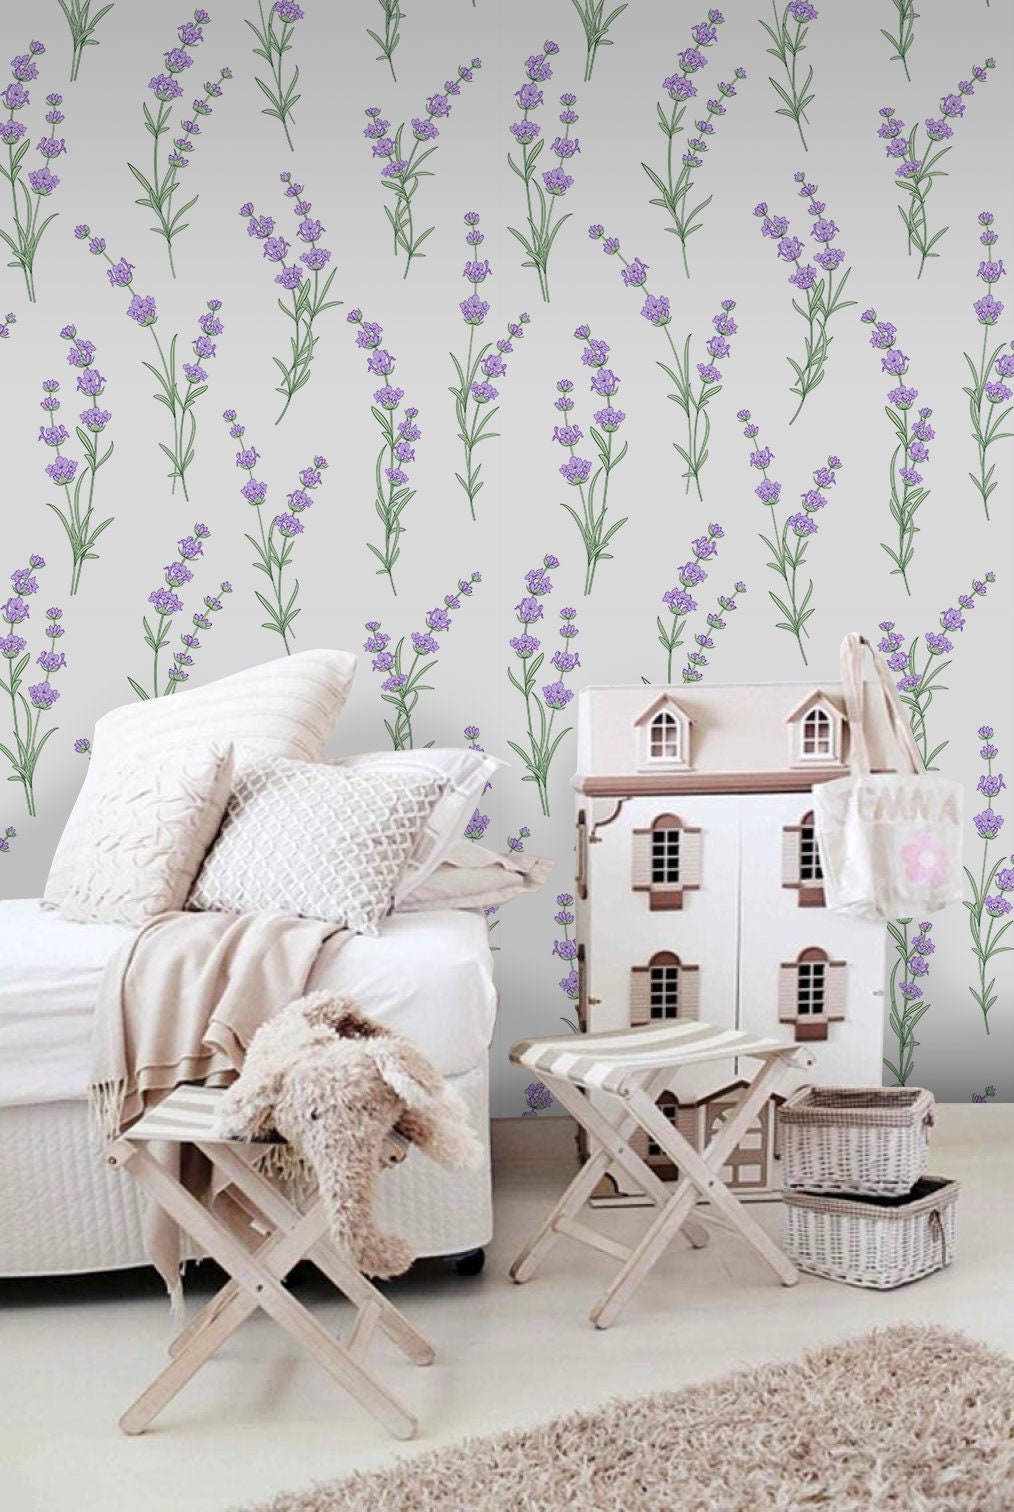 Dundee Deco Falkirk Bhoid Purple Mauve Lavender Squares Leaves Vinyl Peel  and Stick Self Adhesive Wallpaper Covers 36 sq ft MGBHHD92645B  The  Home Depot